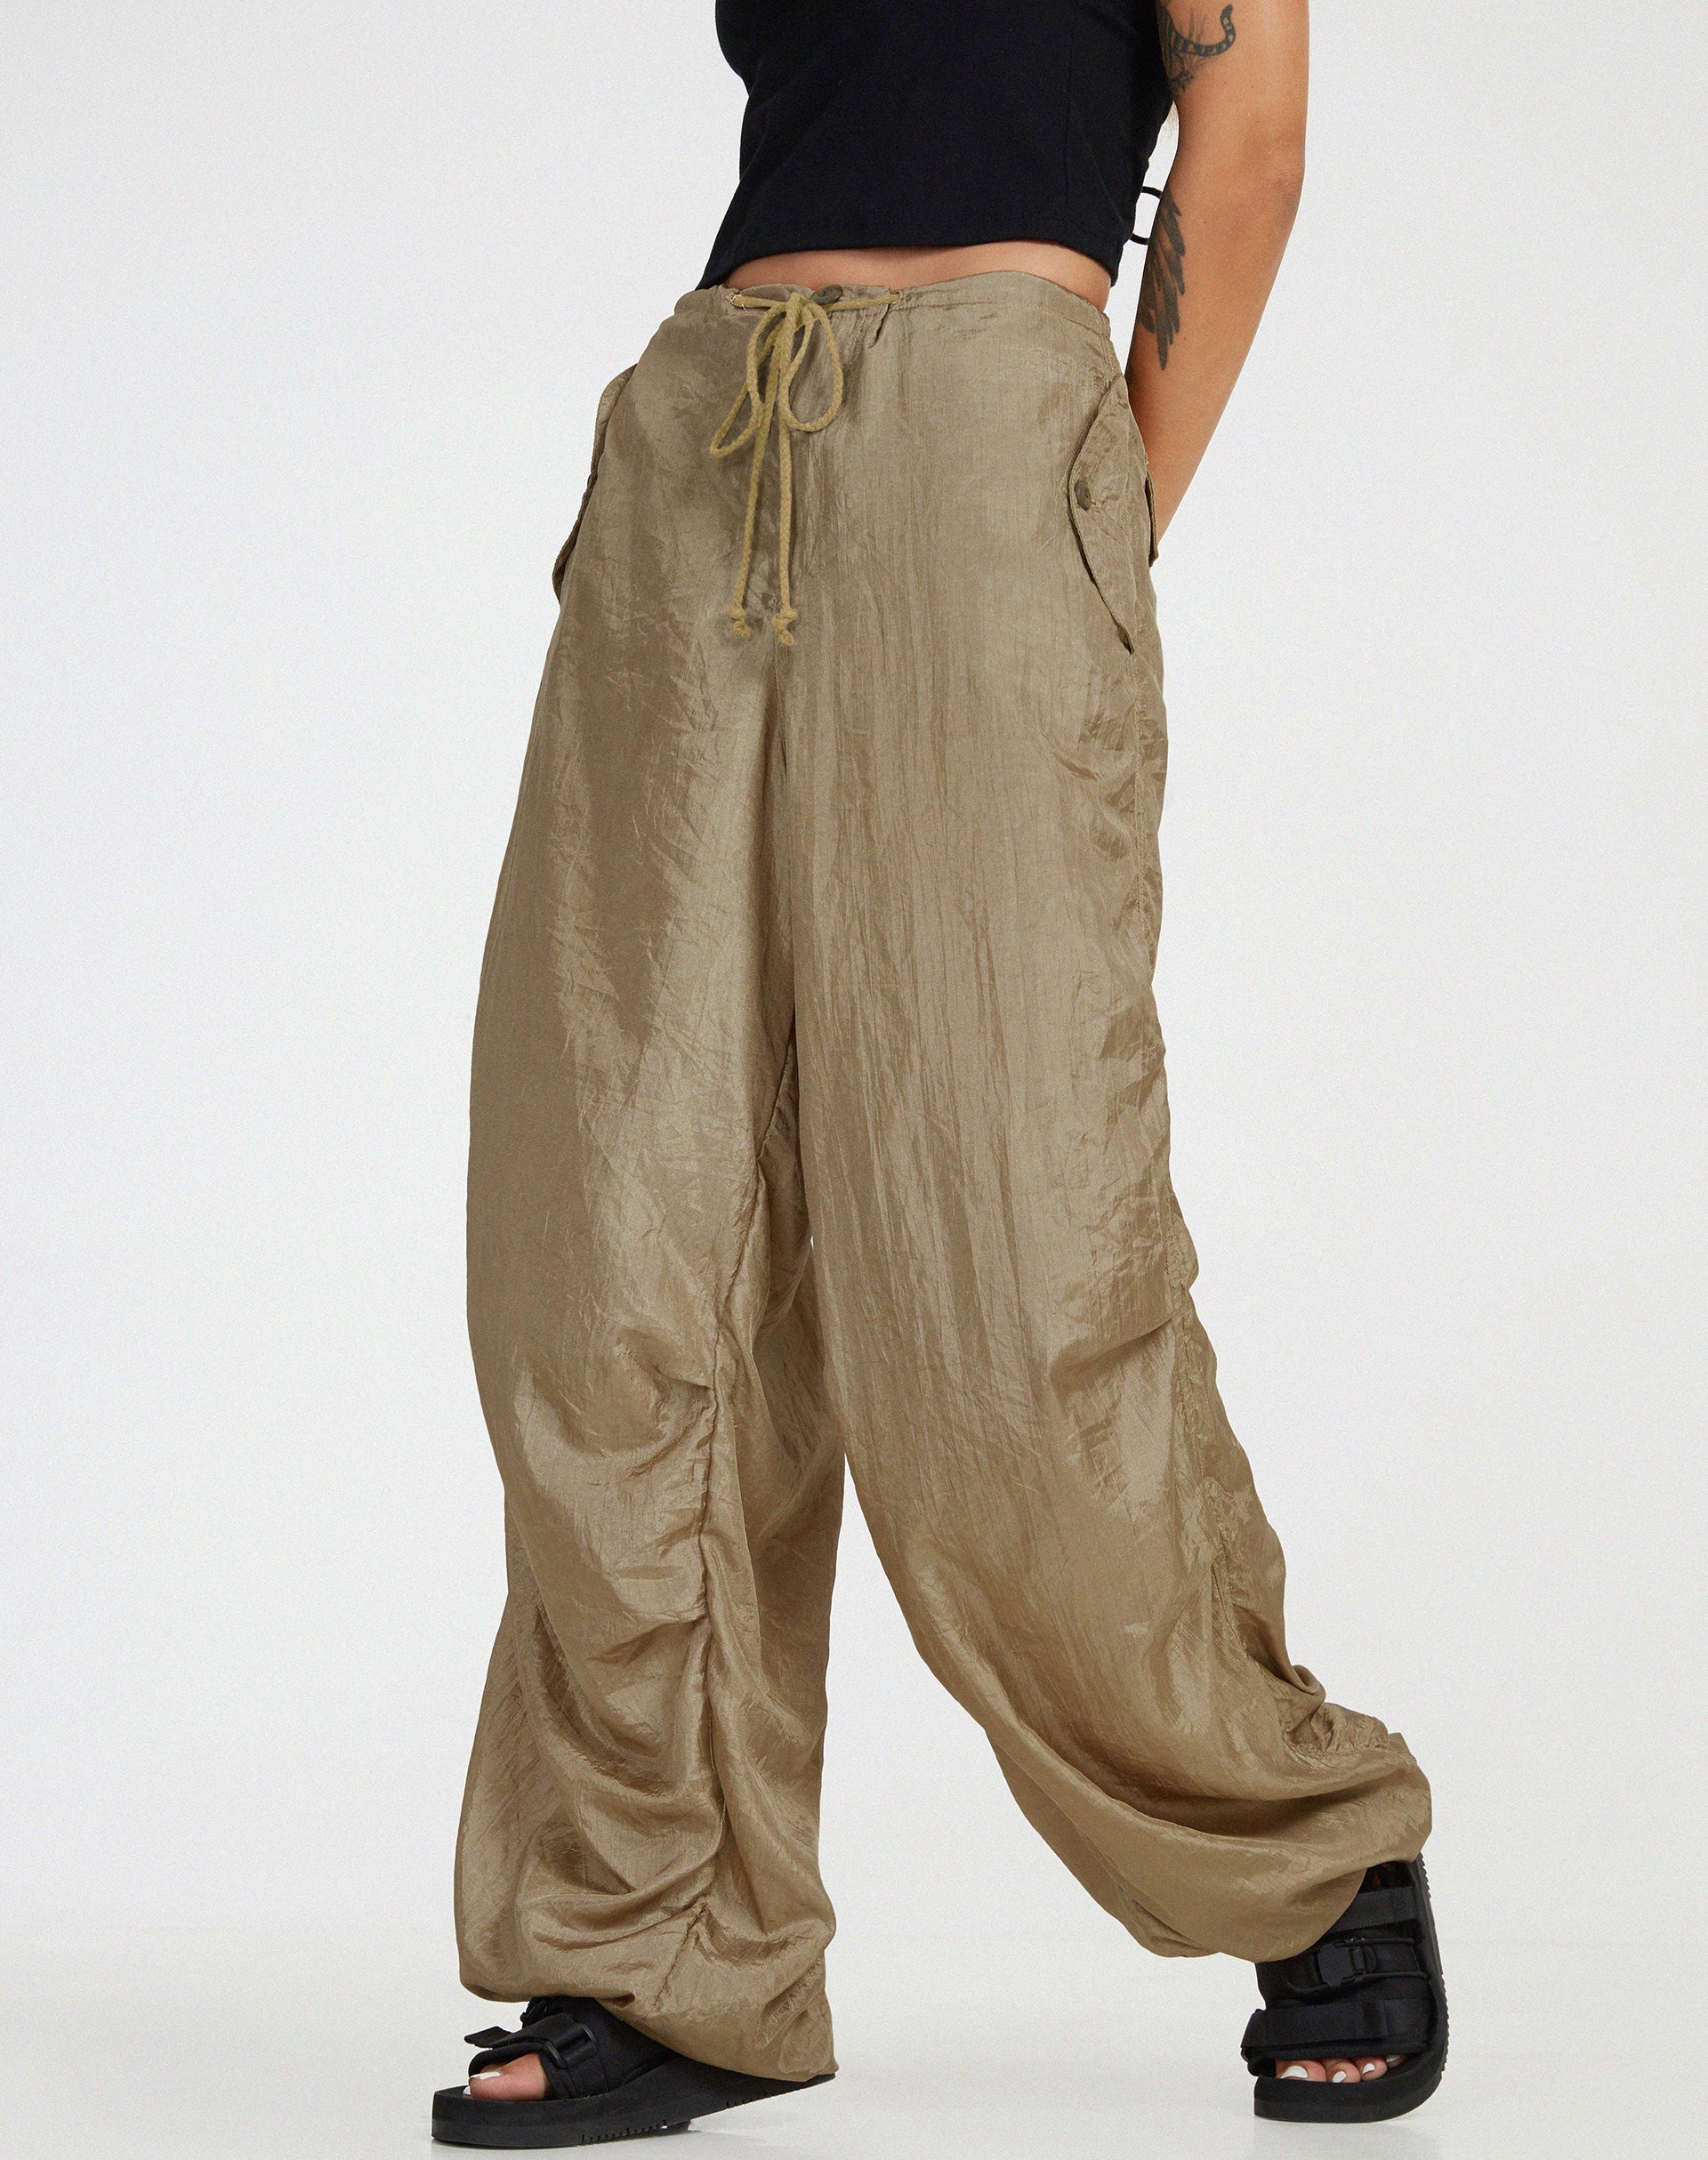 image of Chute Trouser in Parachute Tortilla